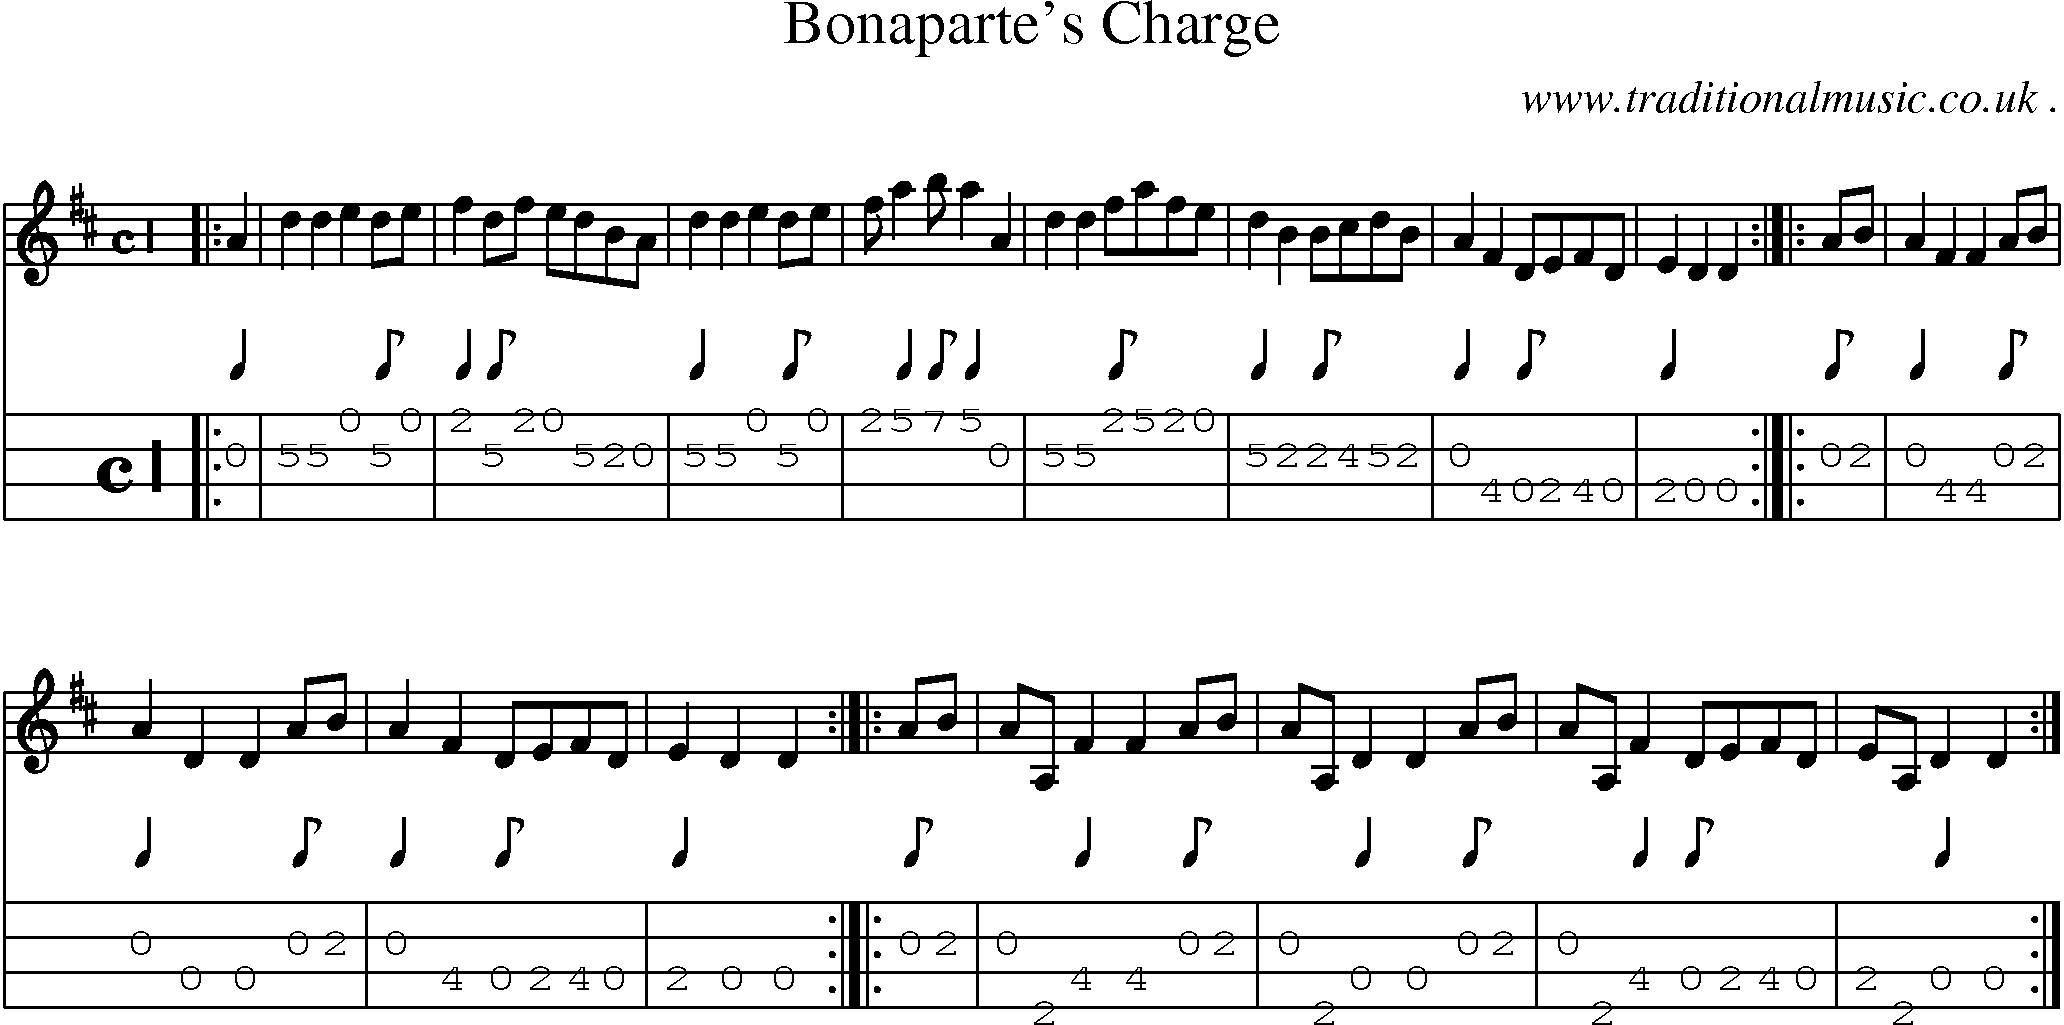 Sheet-Music and Mandolin Tabs for Bonapartes Charge